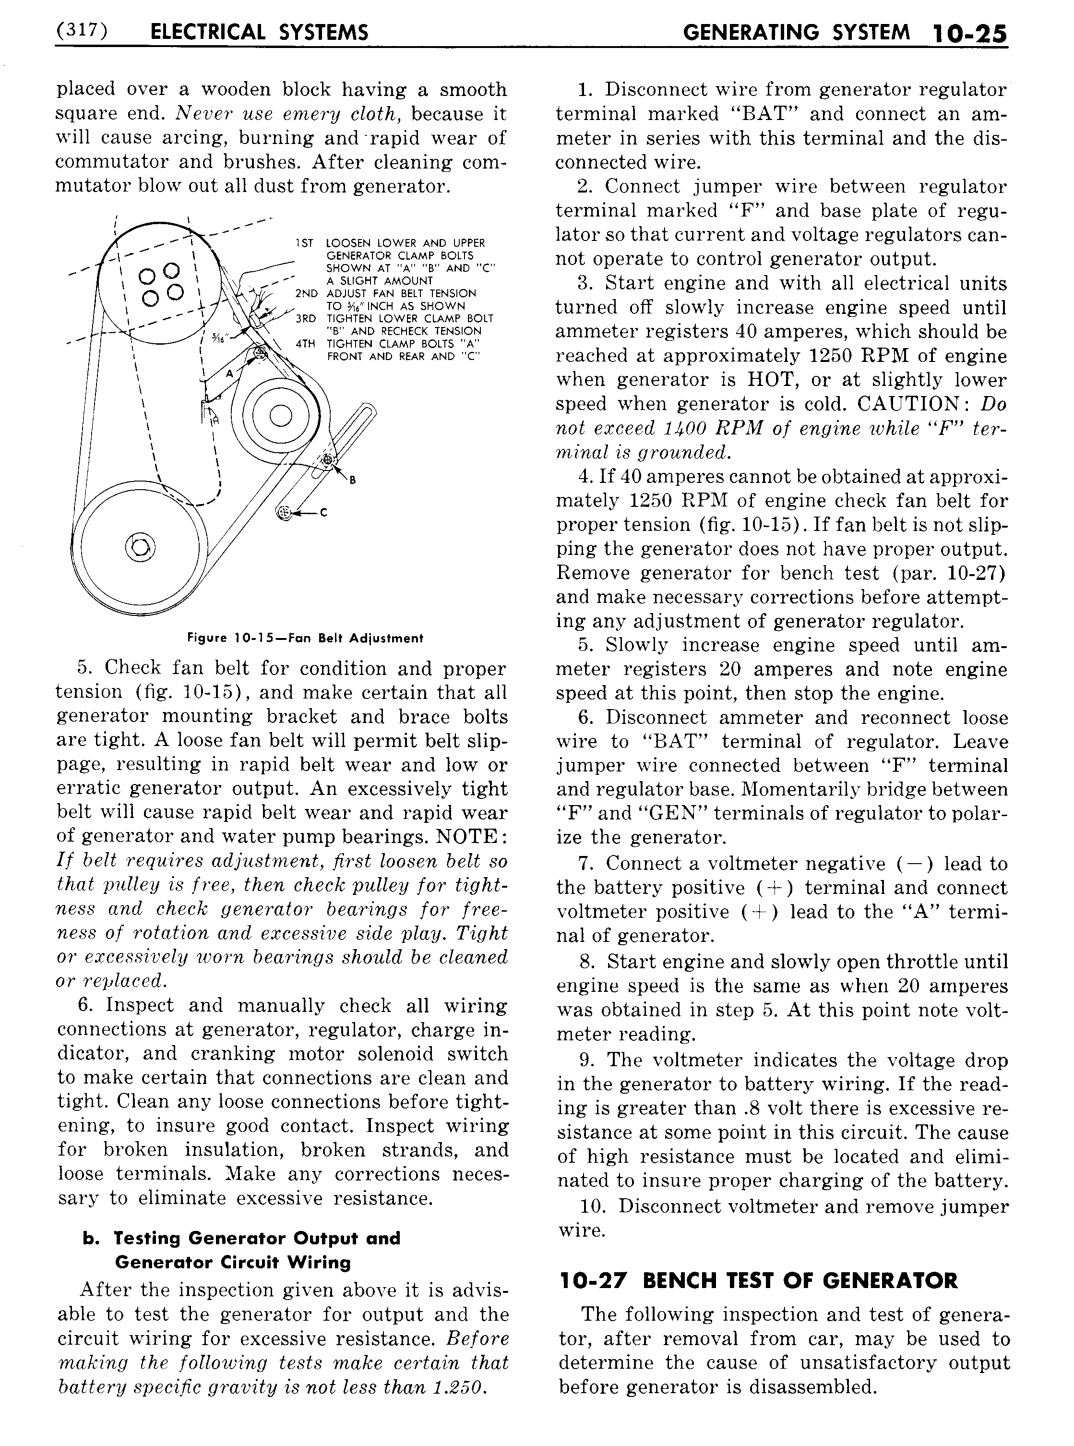 n_11 1951 Buick Shop Manual - Electrical Systems-025-025.jpg